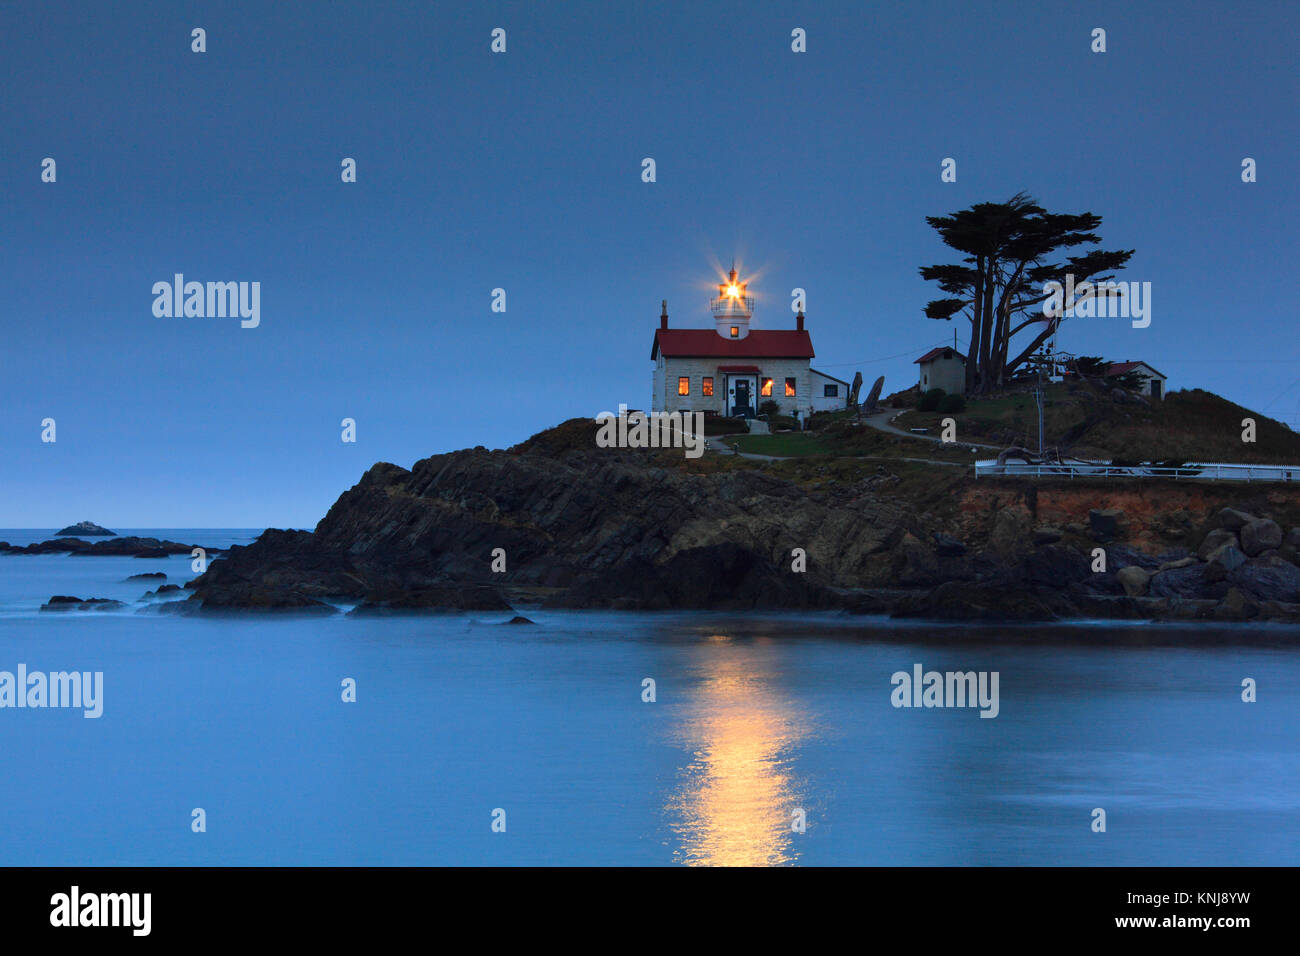 Battery Point Lighthouse, Crescent City in Northern California, United States Stockfoto